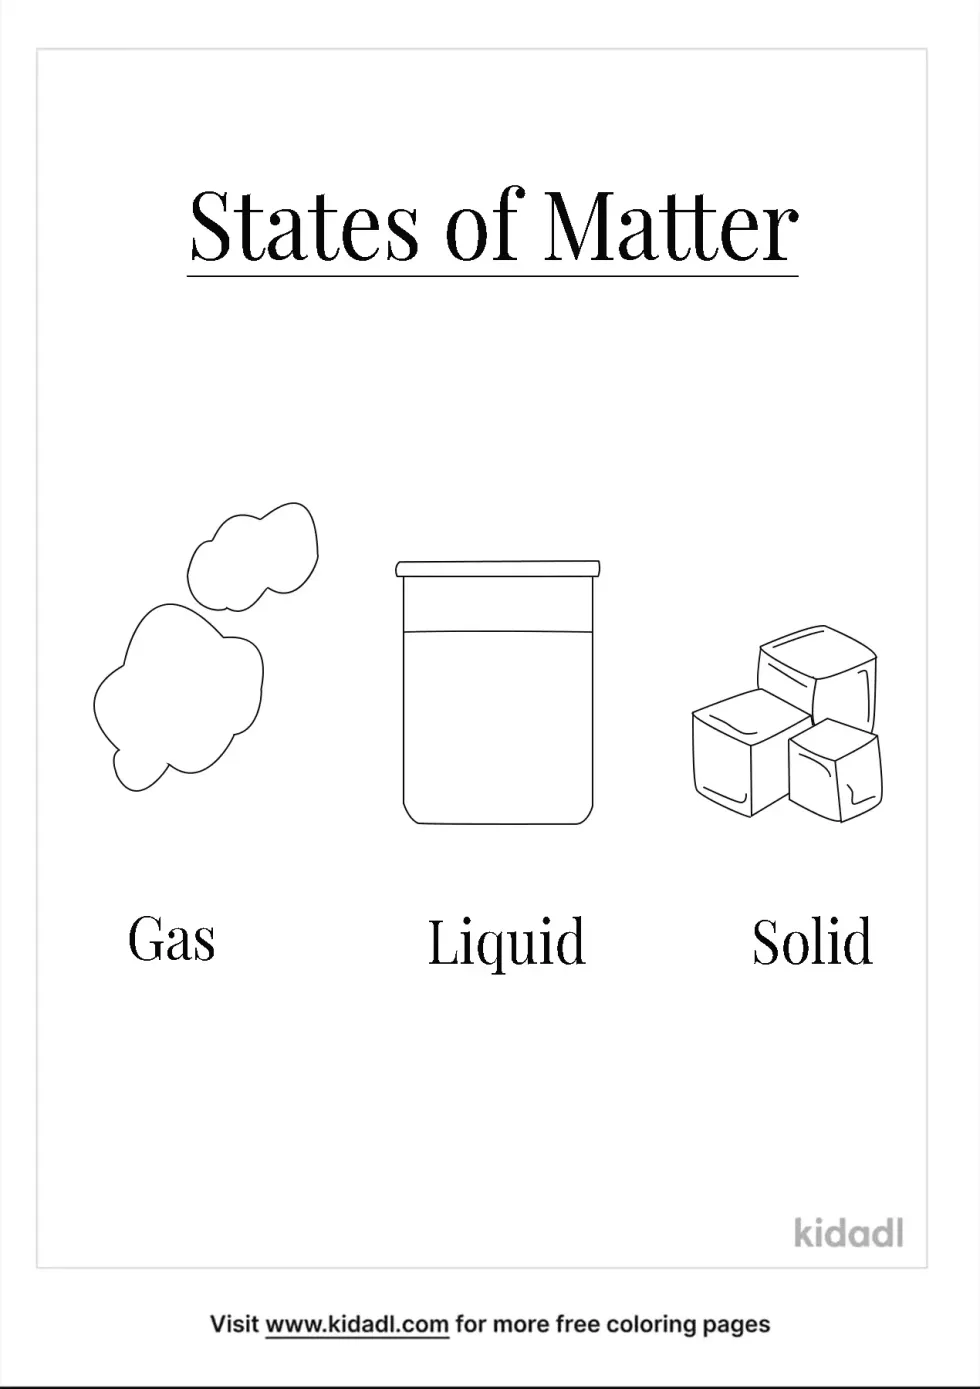 States Of Matter Coloring Page